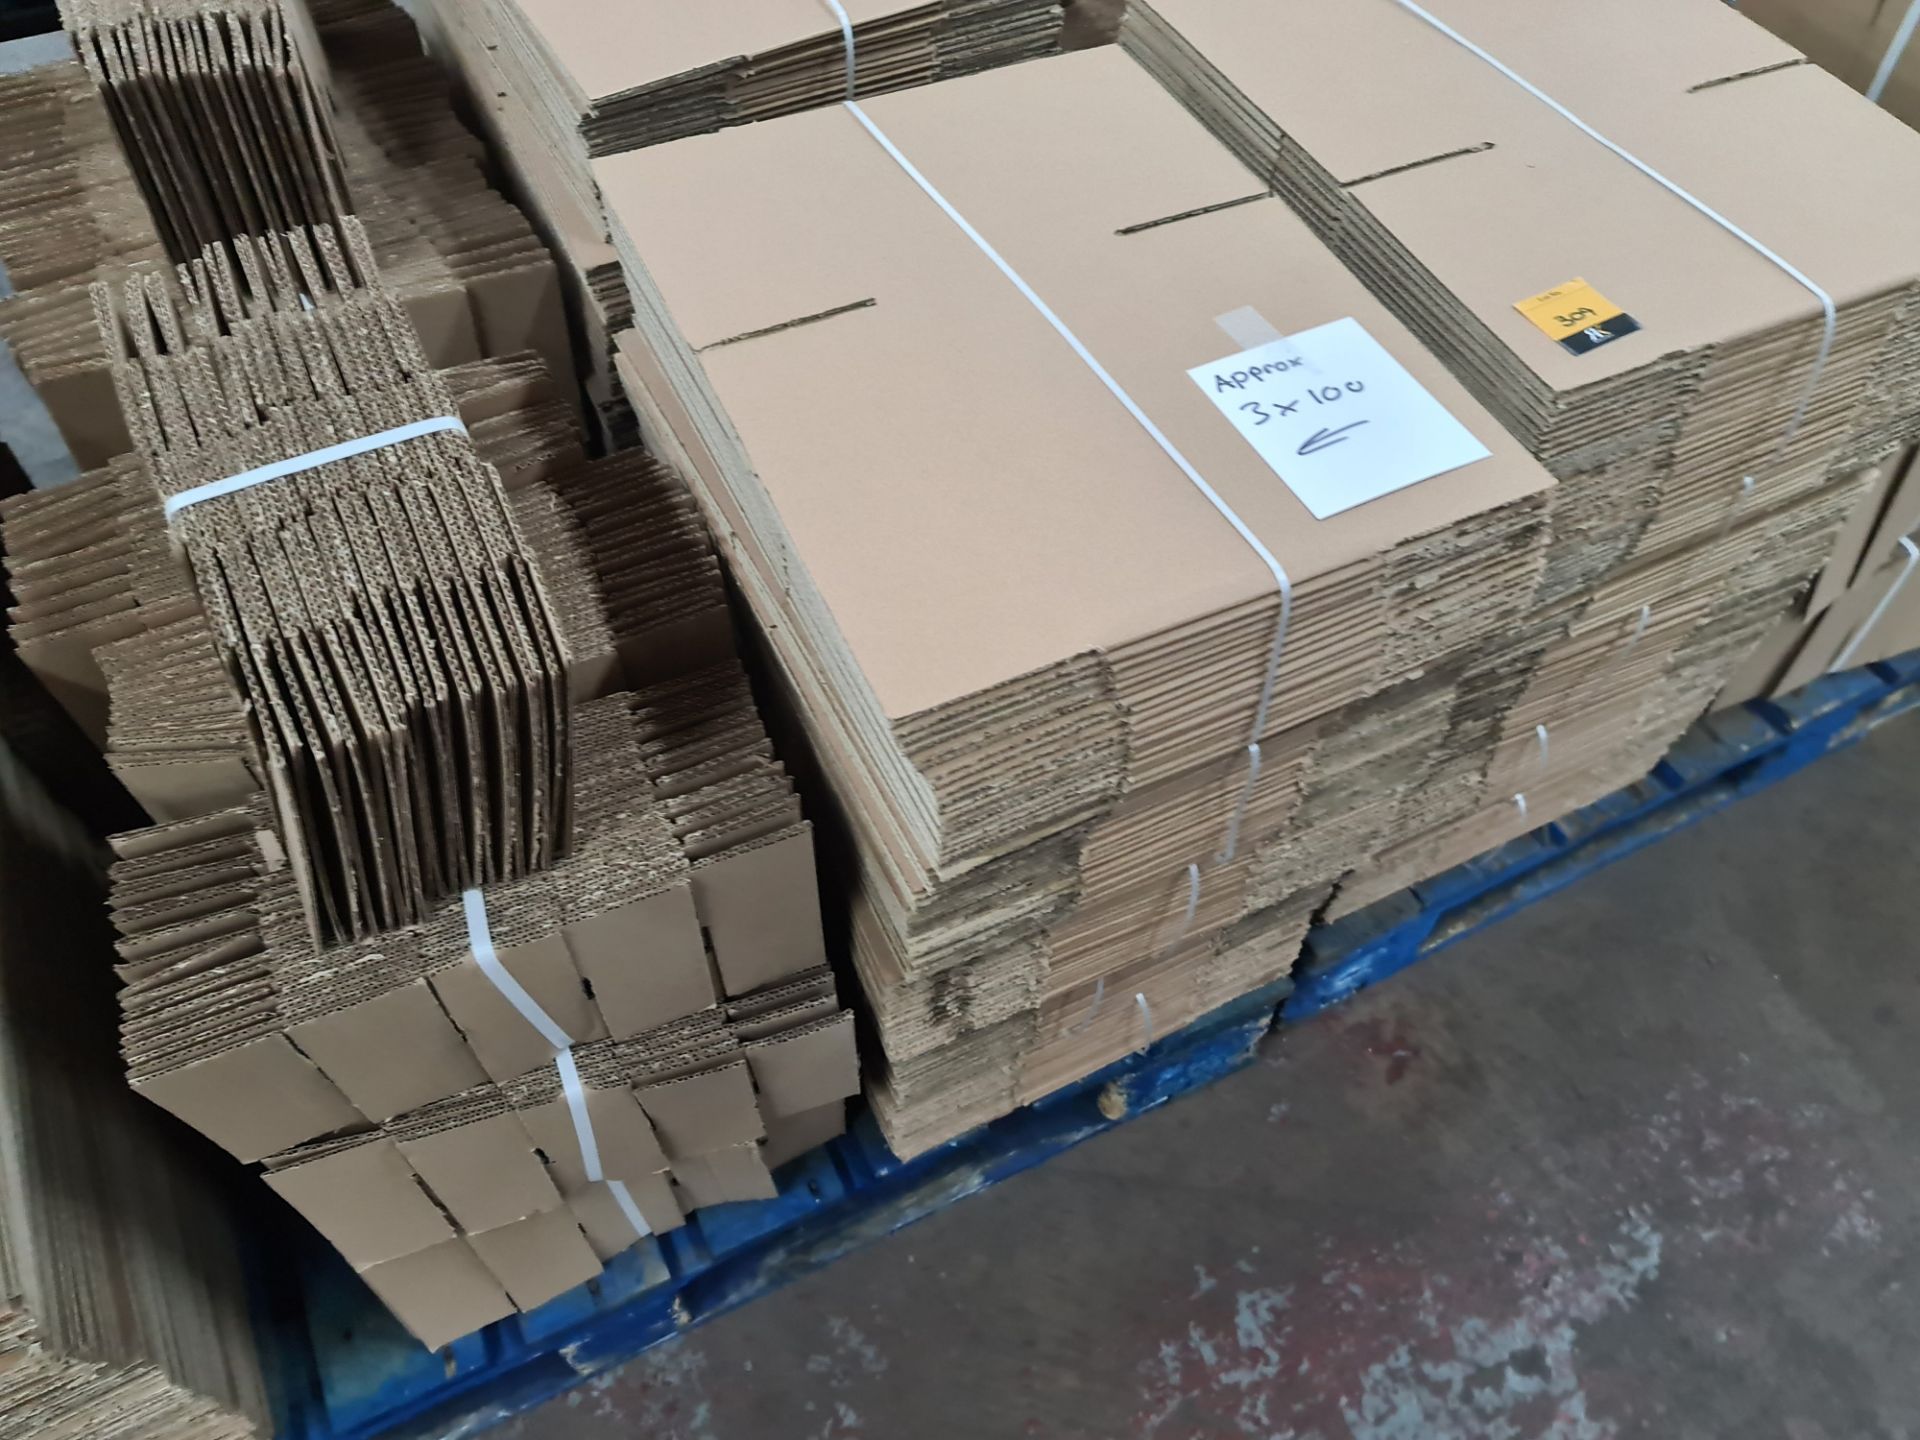 The contents of a pallet of cardboard boxes comprising approximately 300 boxes and 300 inserts in to - Image 5 of 8